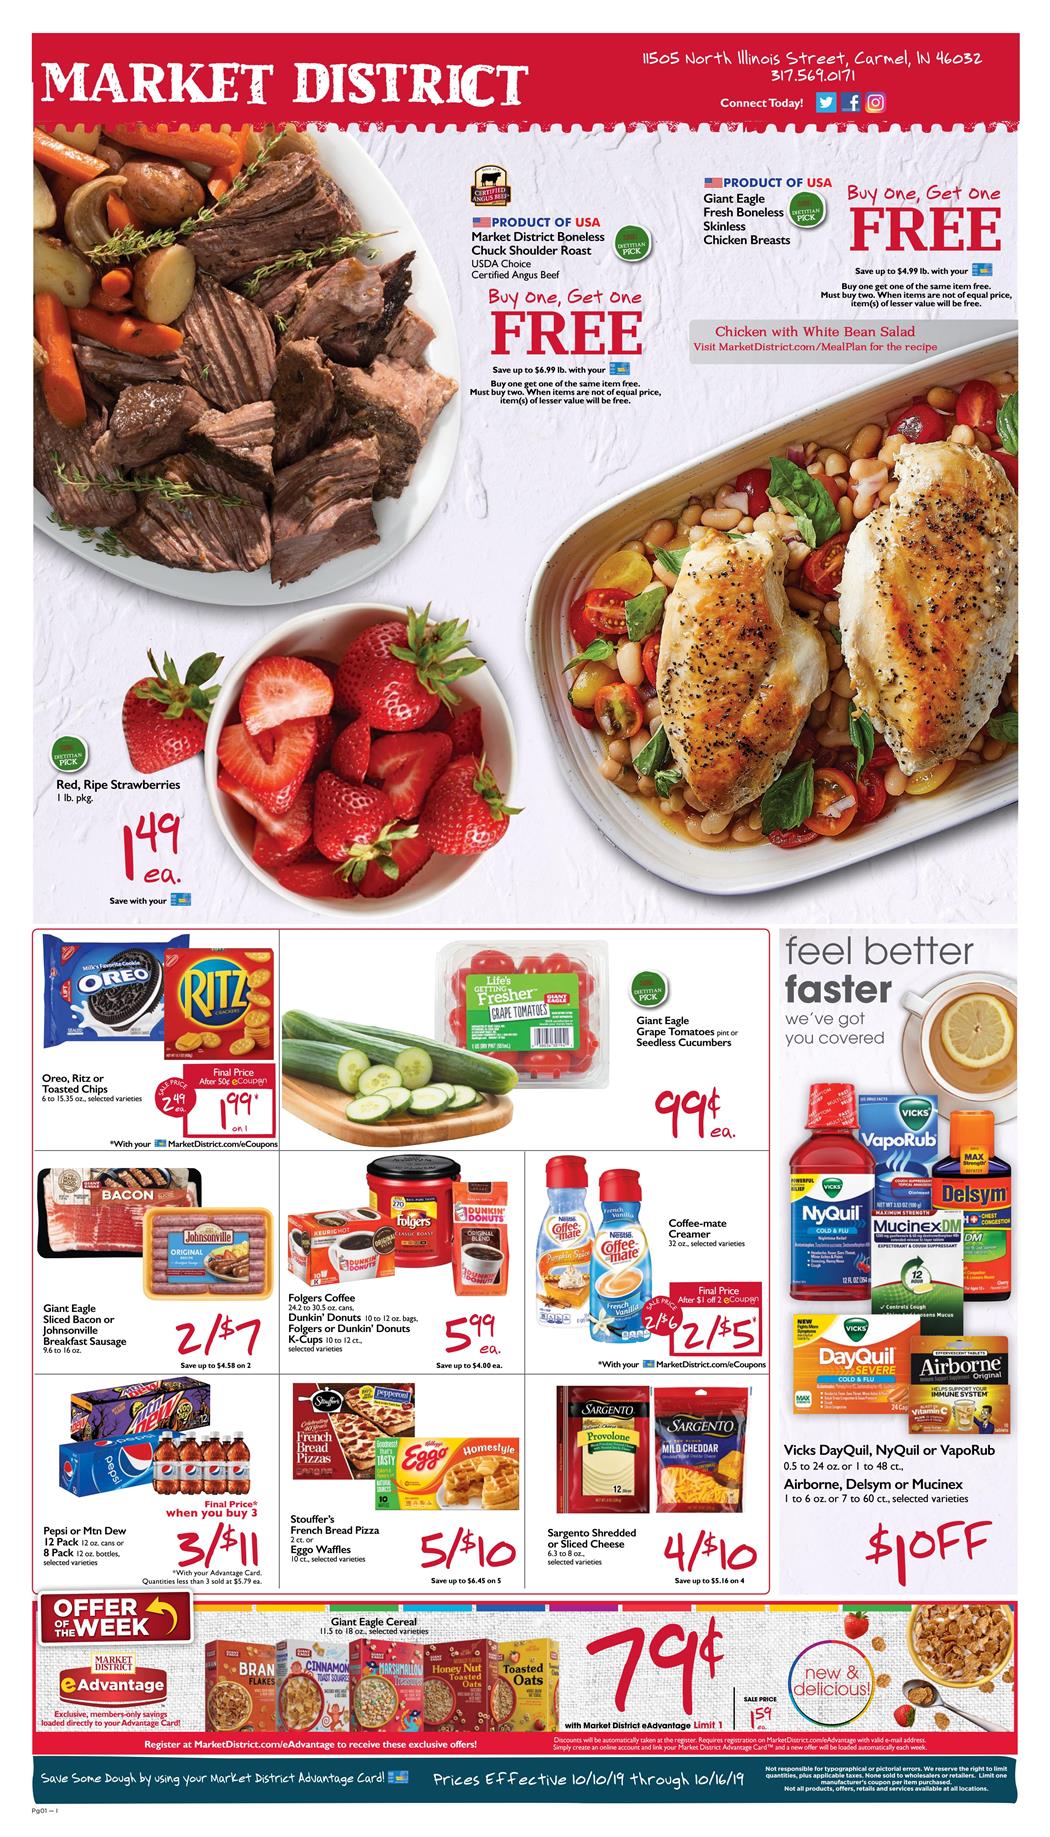 Giant Eagle Weekly Ad Oct 10 – Oct 16, 2019